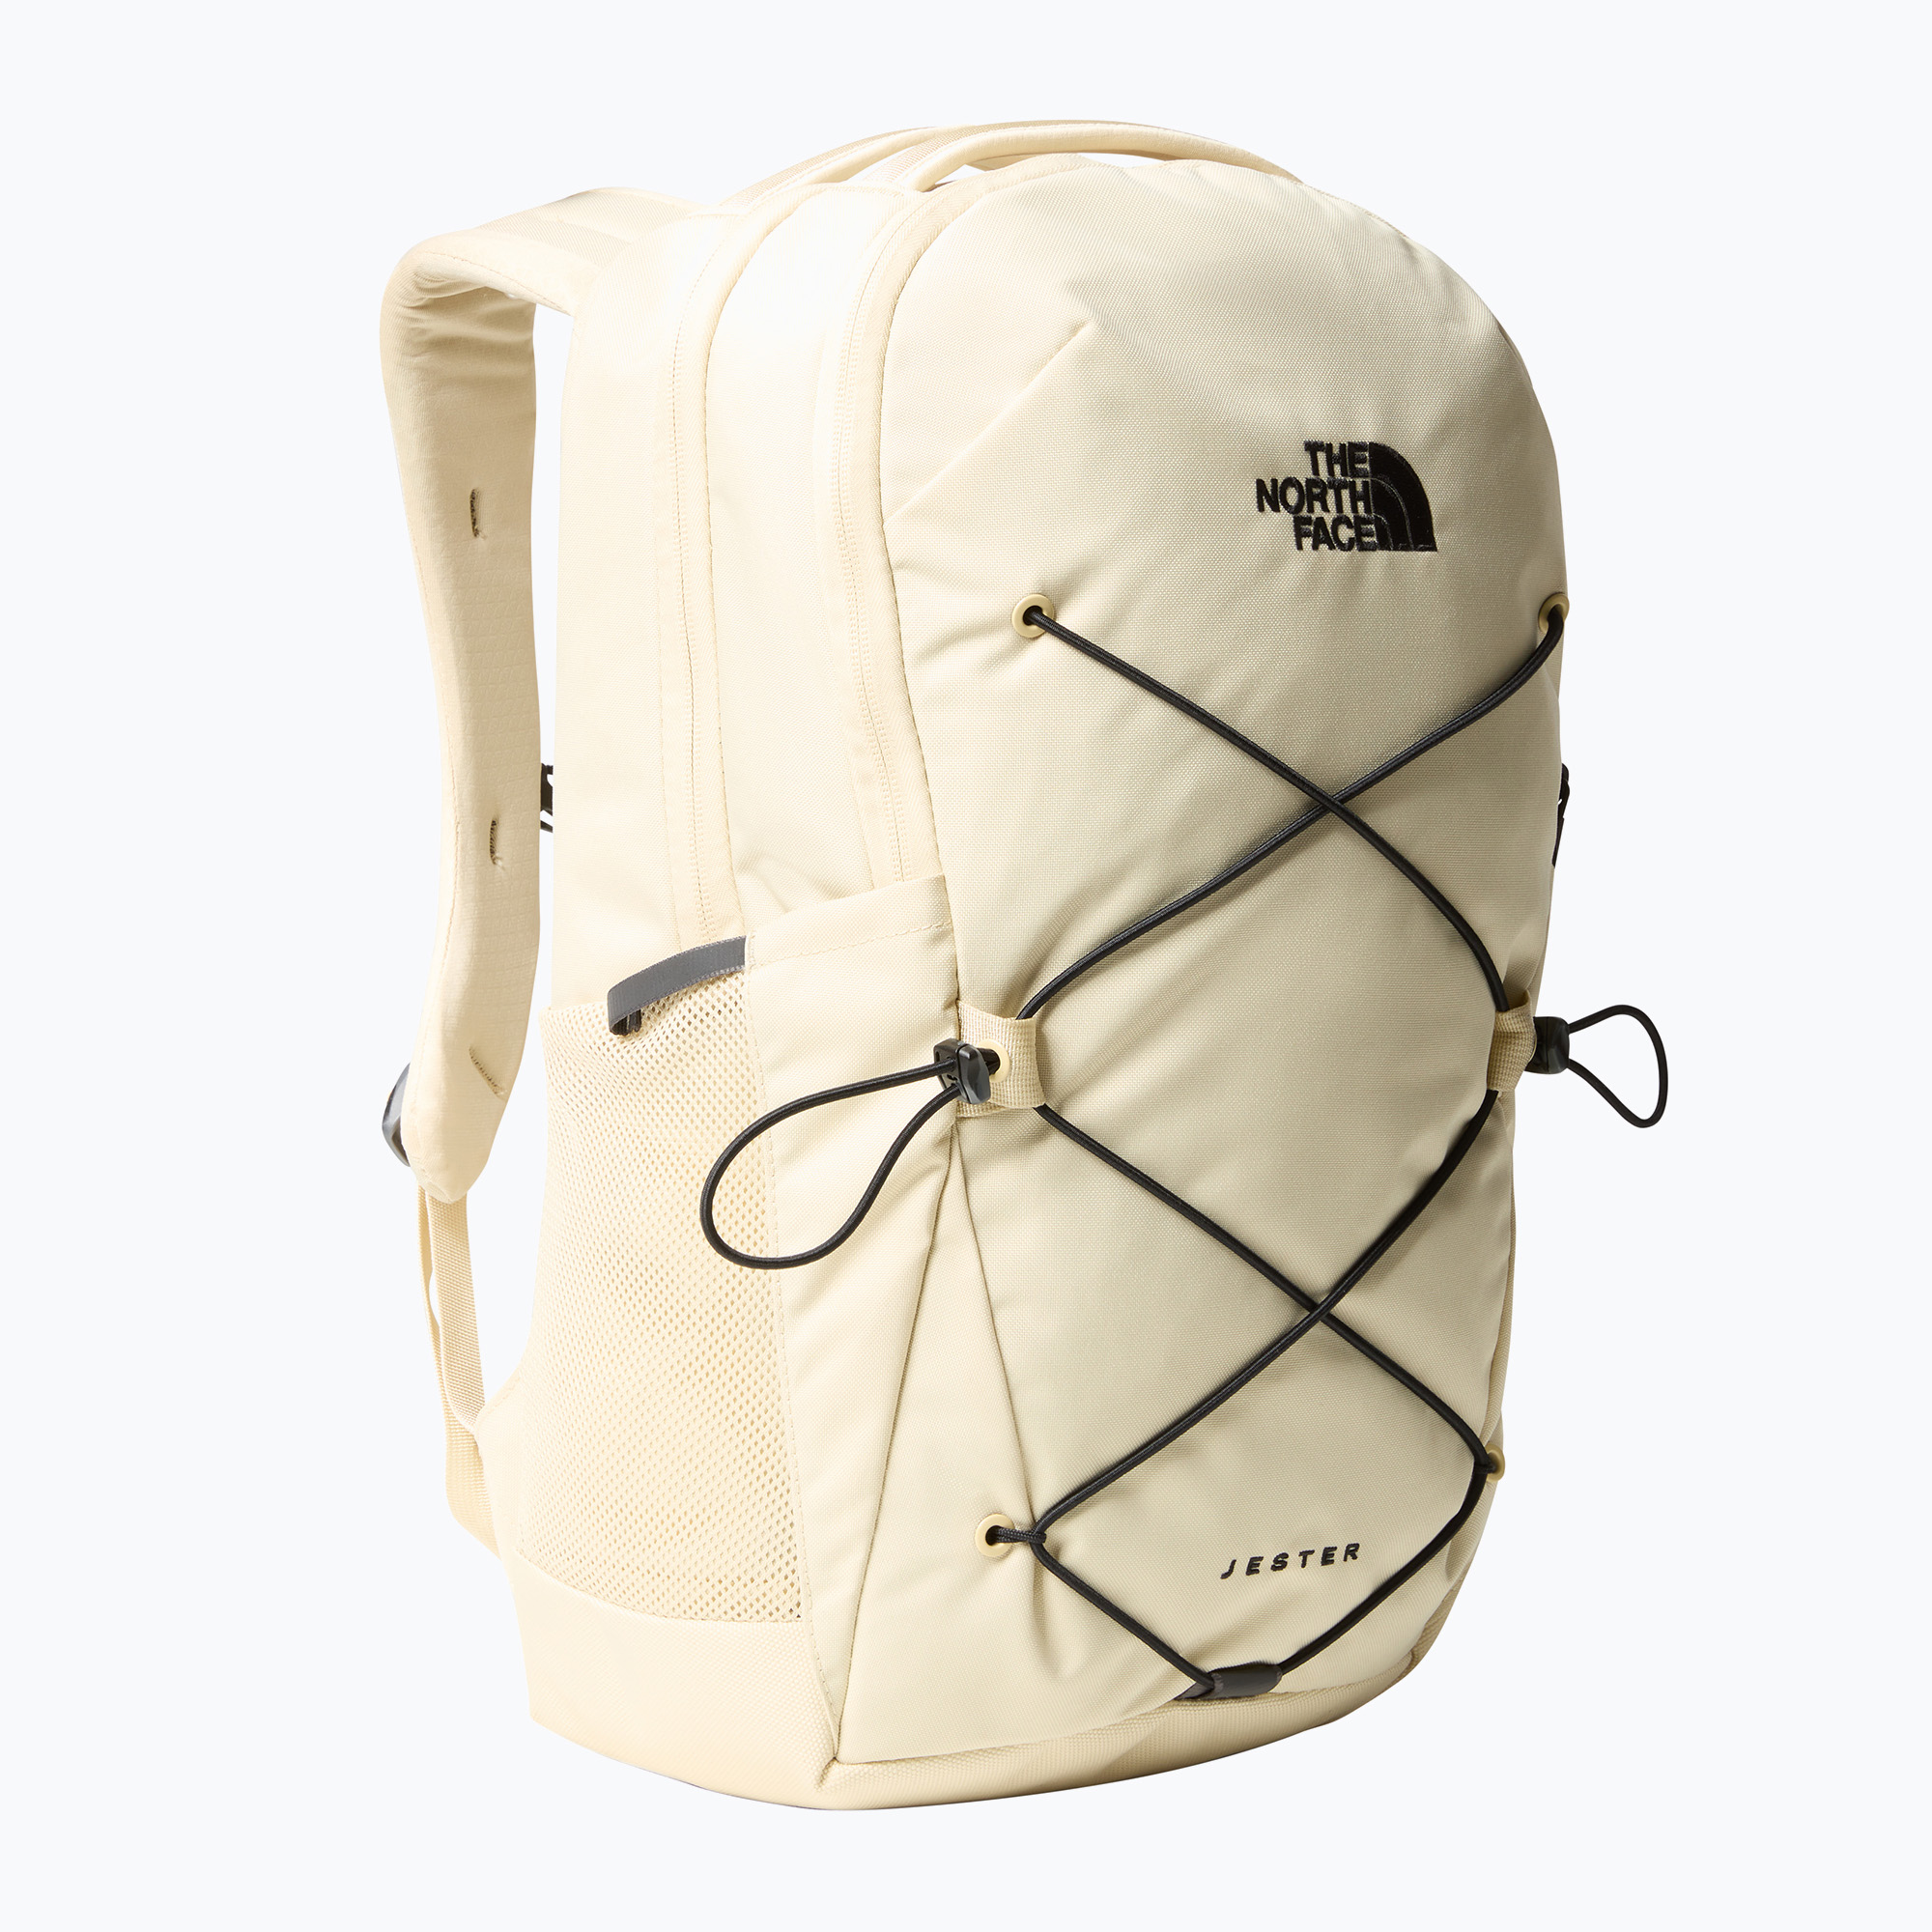 Градска раница The North Face Jester 28 l gravel/black